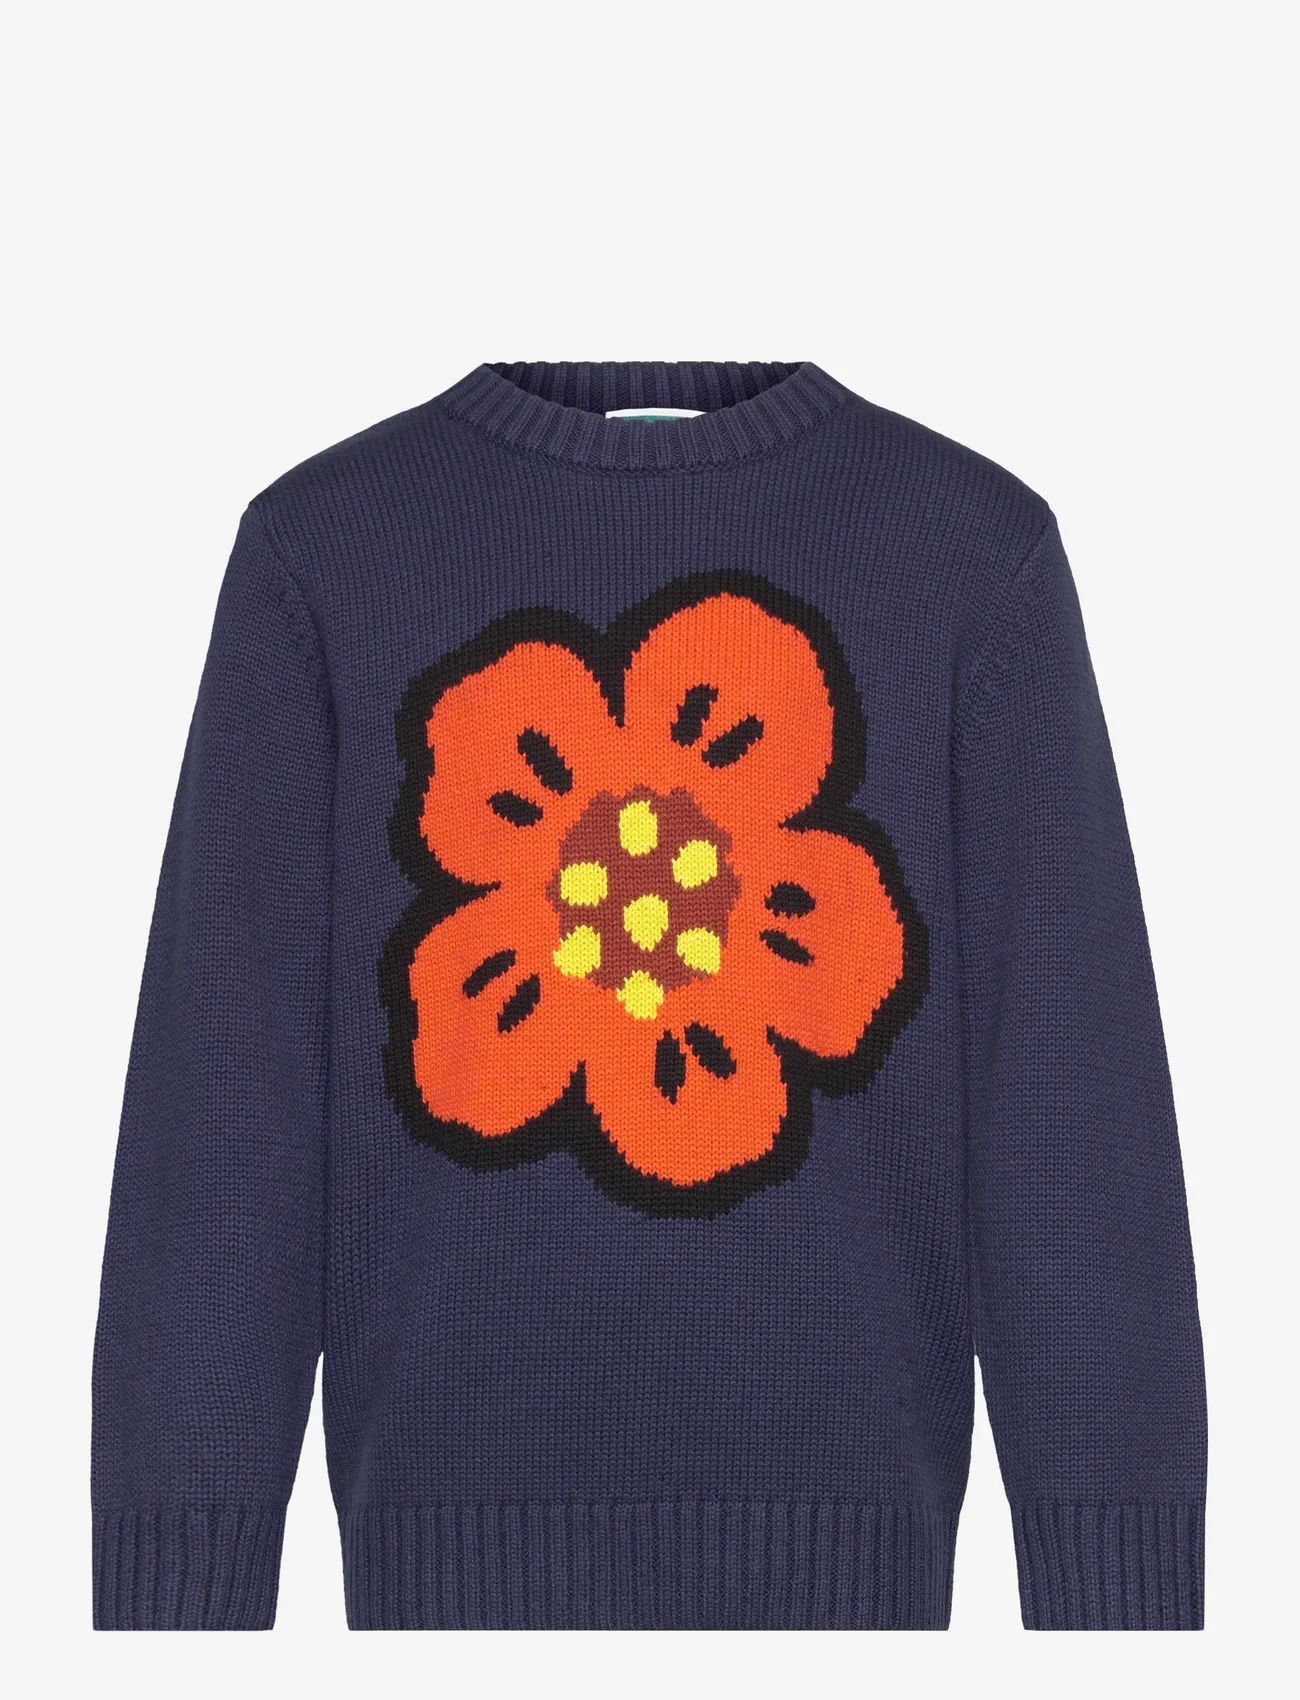 Kenzo - PULLOVER - jumpers - navy - 0